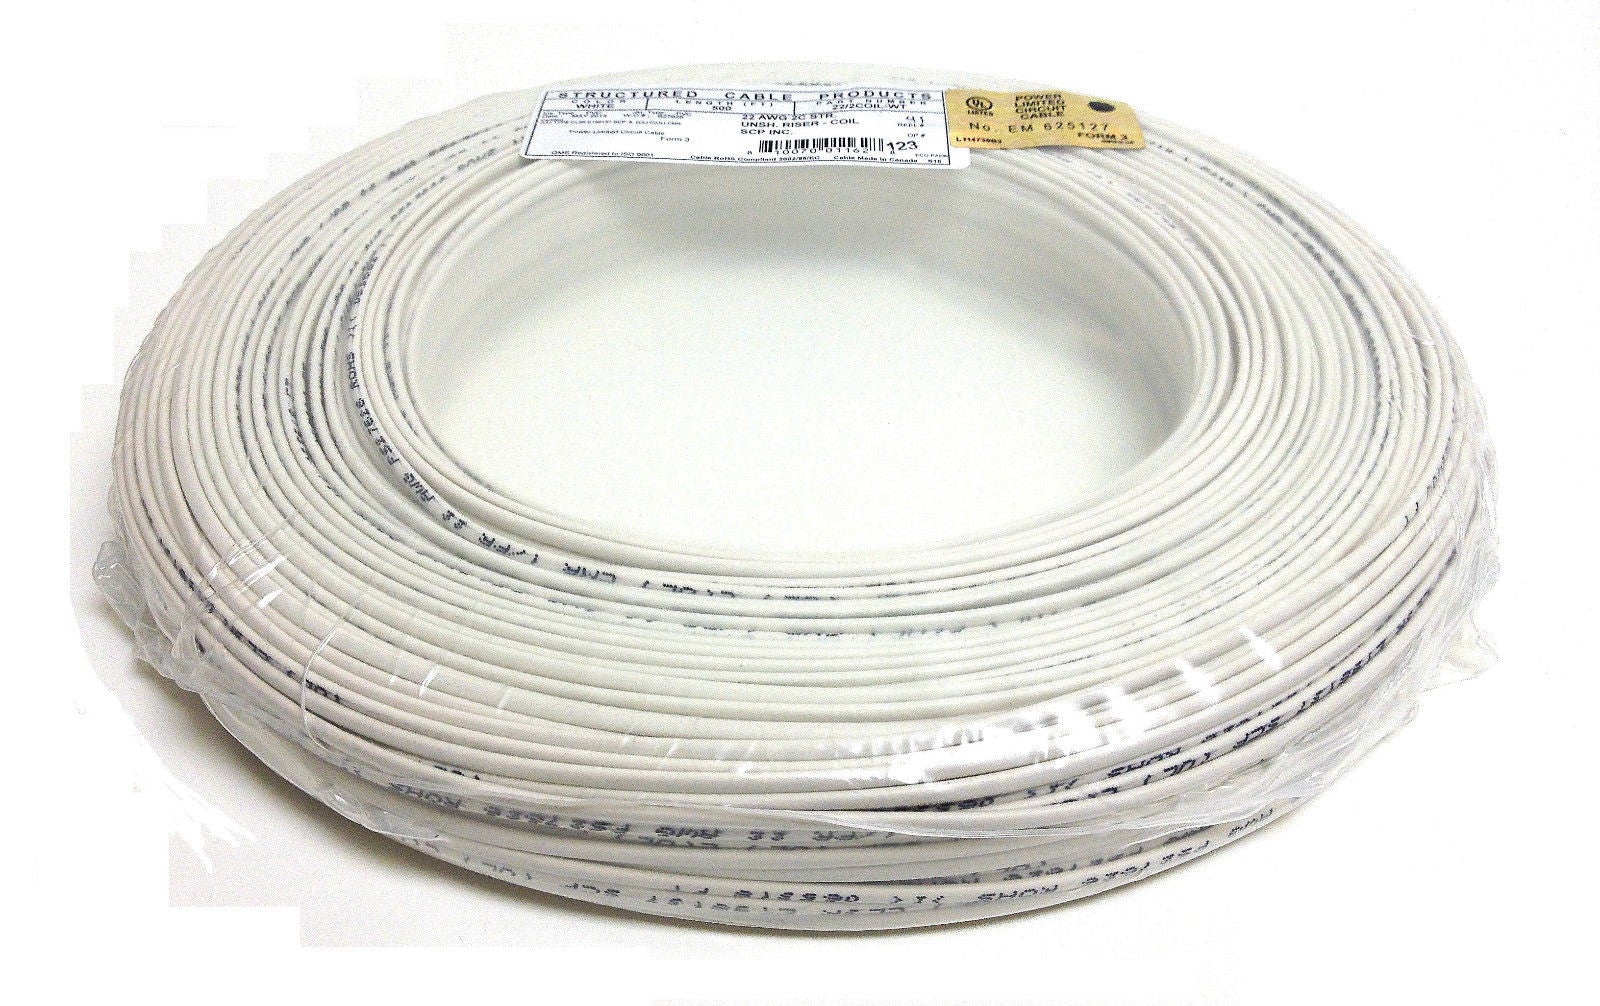 22-2 SOLID PHONE/STATION WIRE  WHITE 500' COIL PACK - PAM Distributing Co - 1